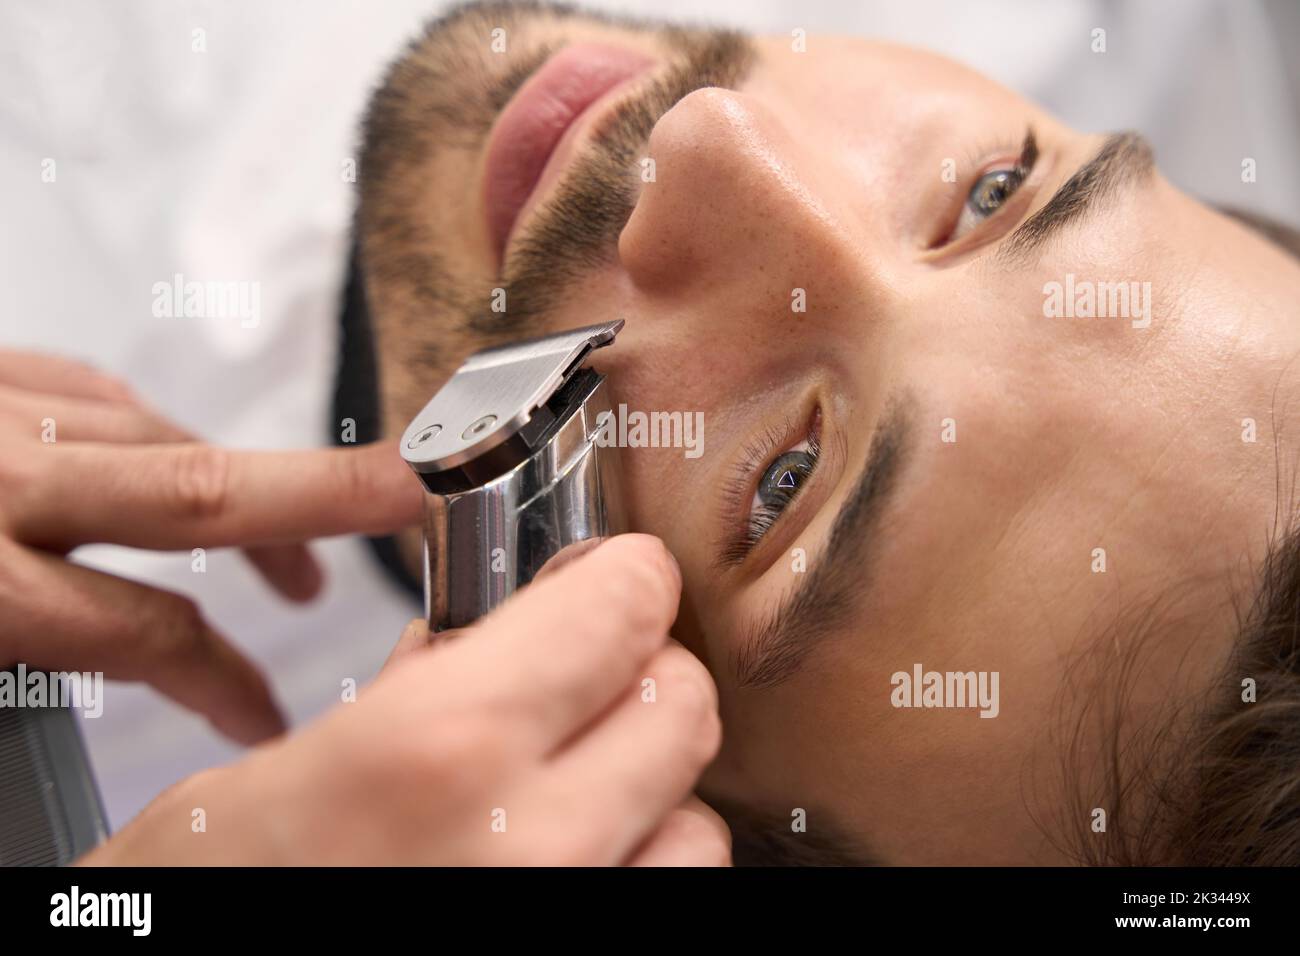 Serious man not moving while barber trimming his moustache Stock Photo